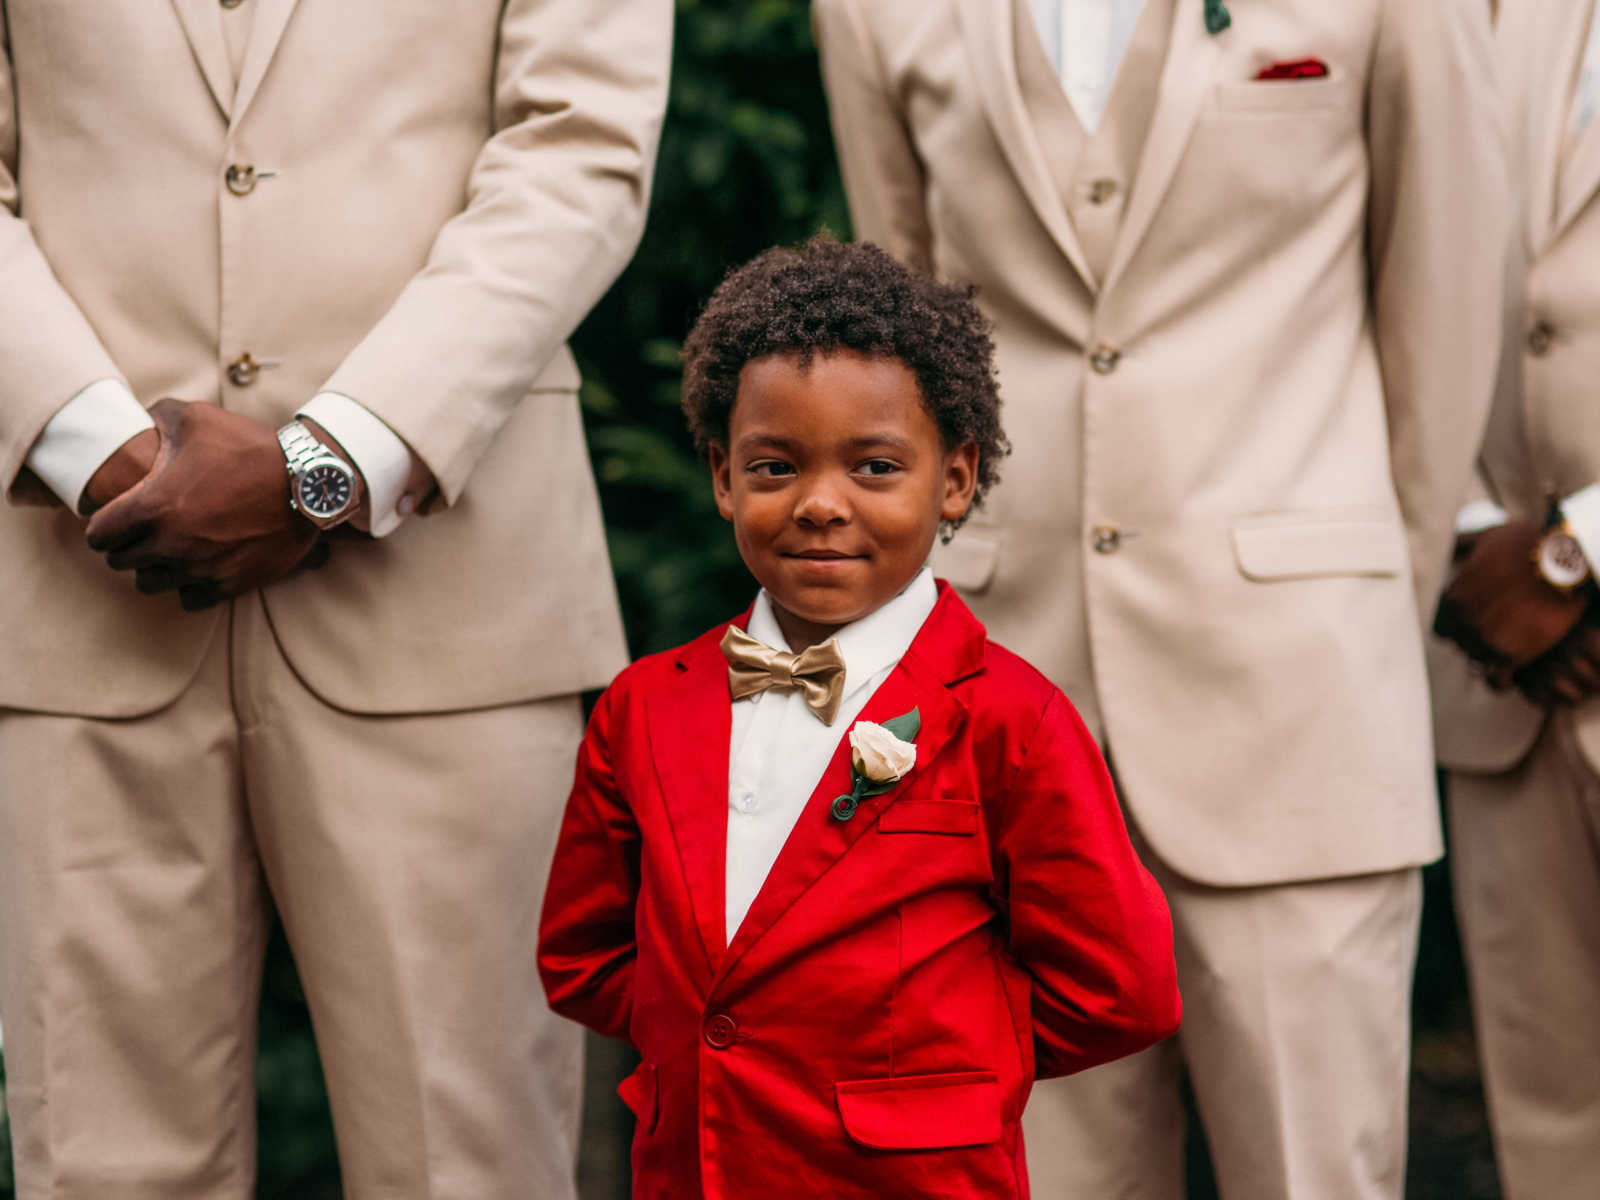 Son of bride smiles in red suit with hands behind his back